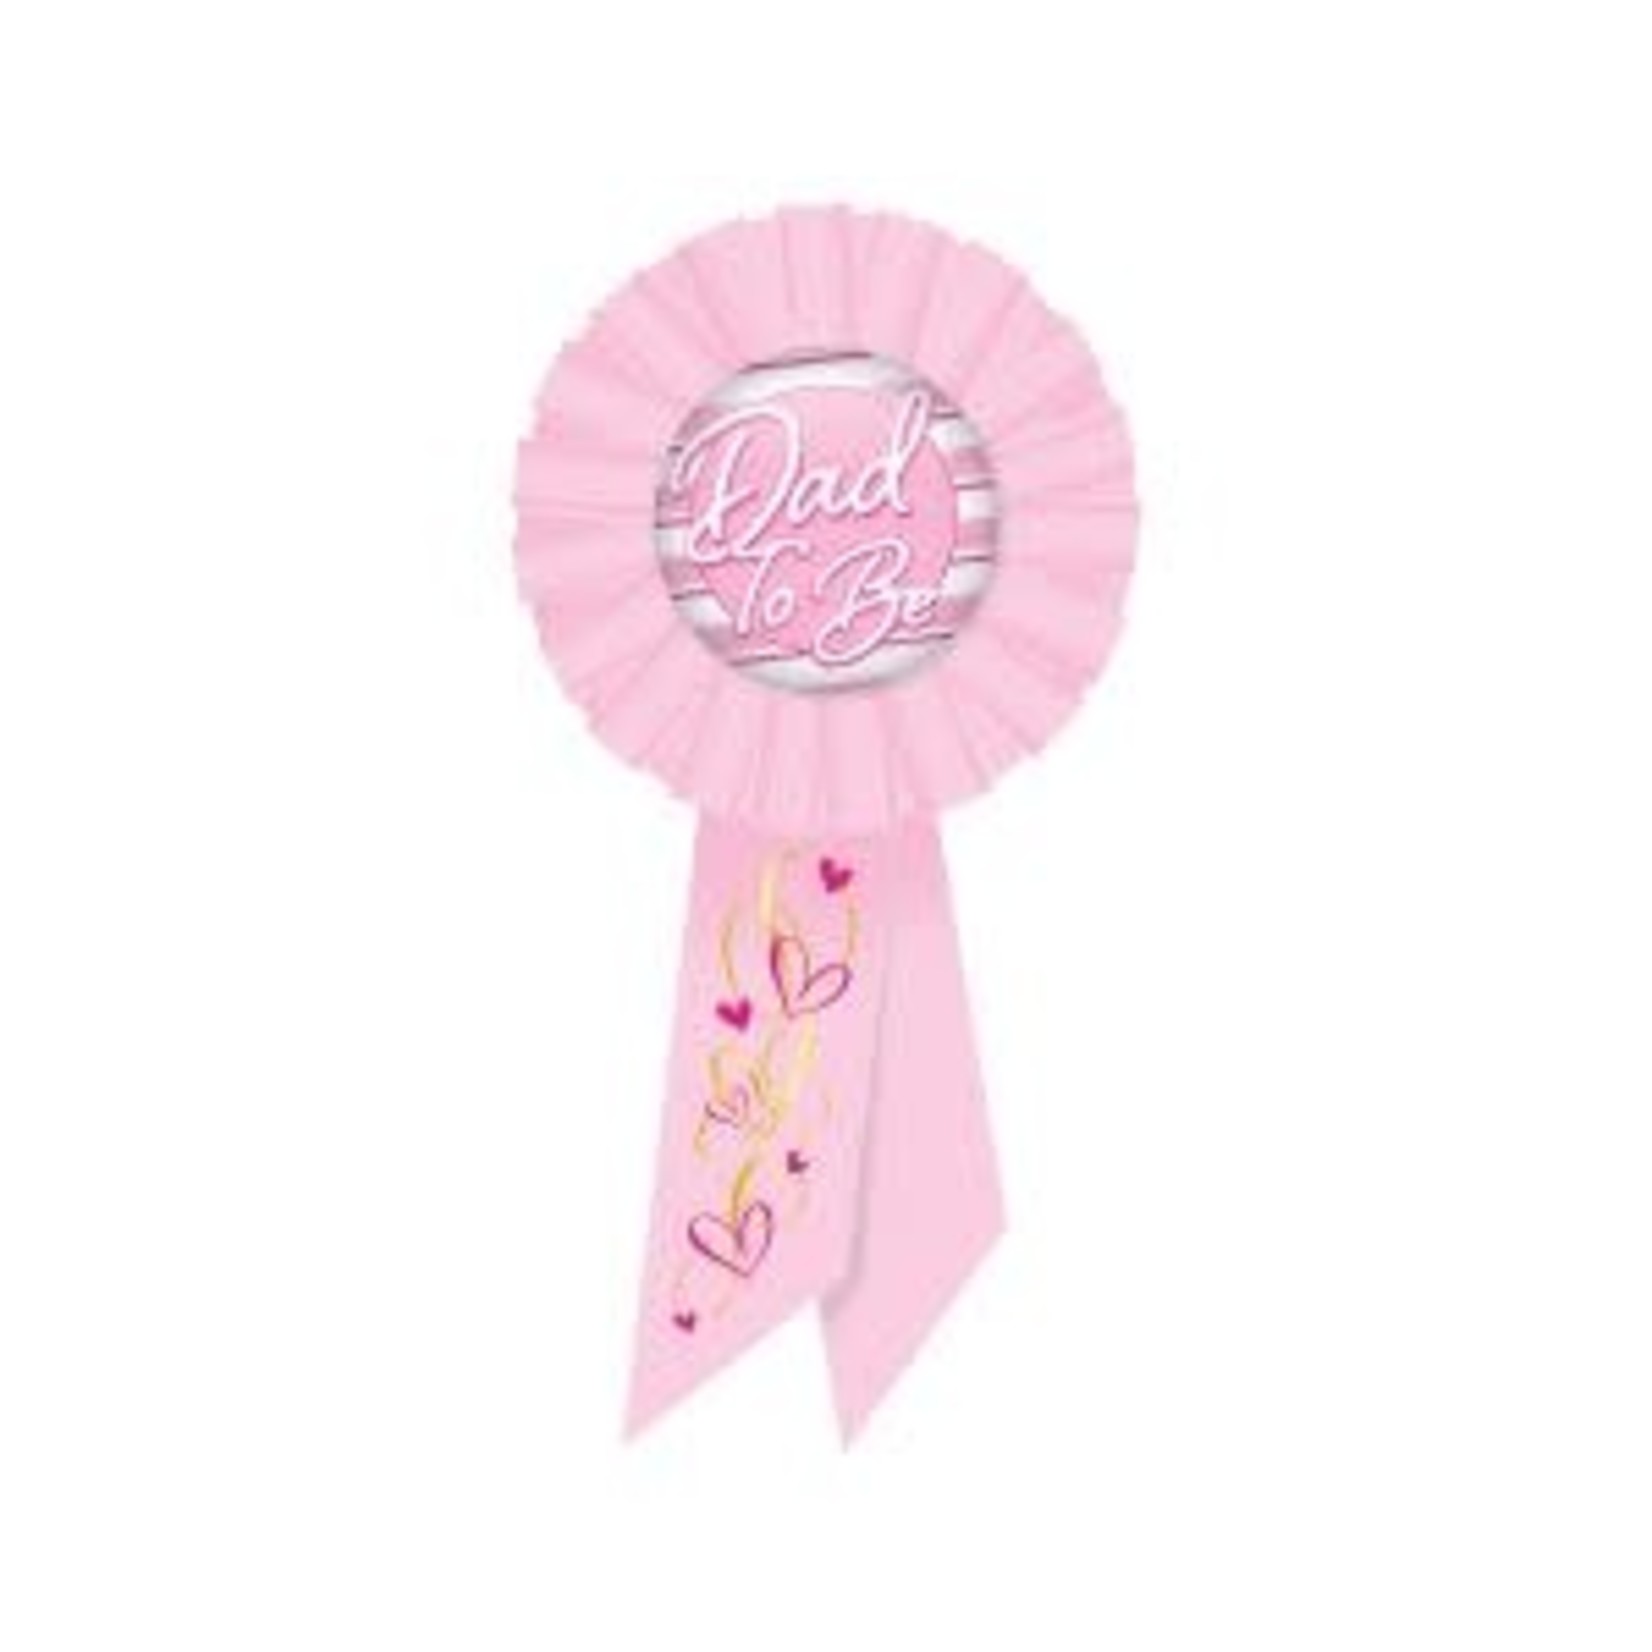 Dad To Be Rosette - Pink